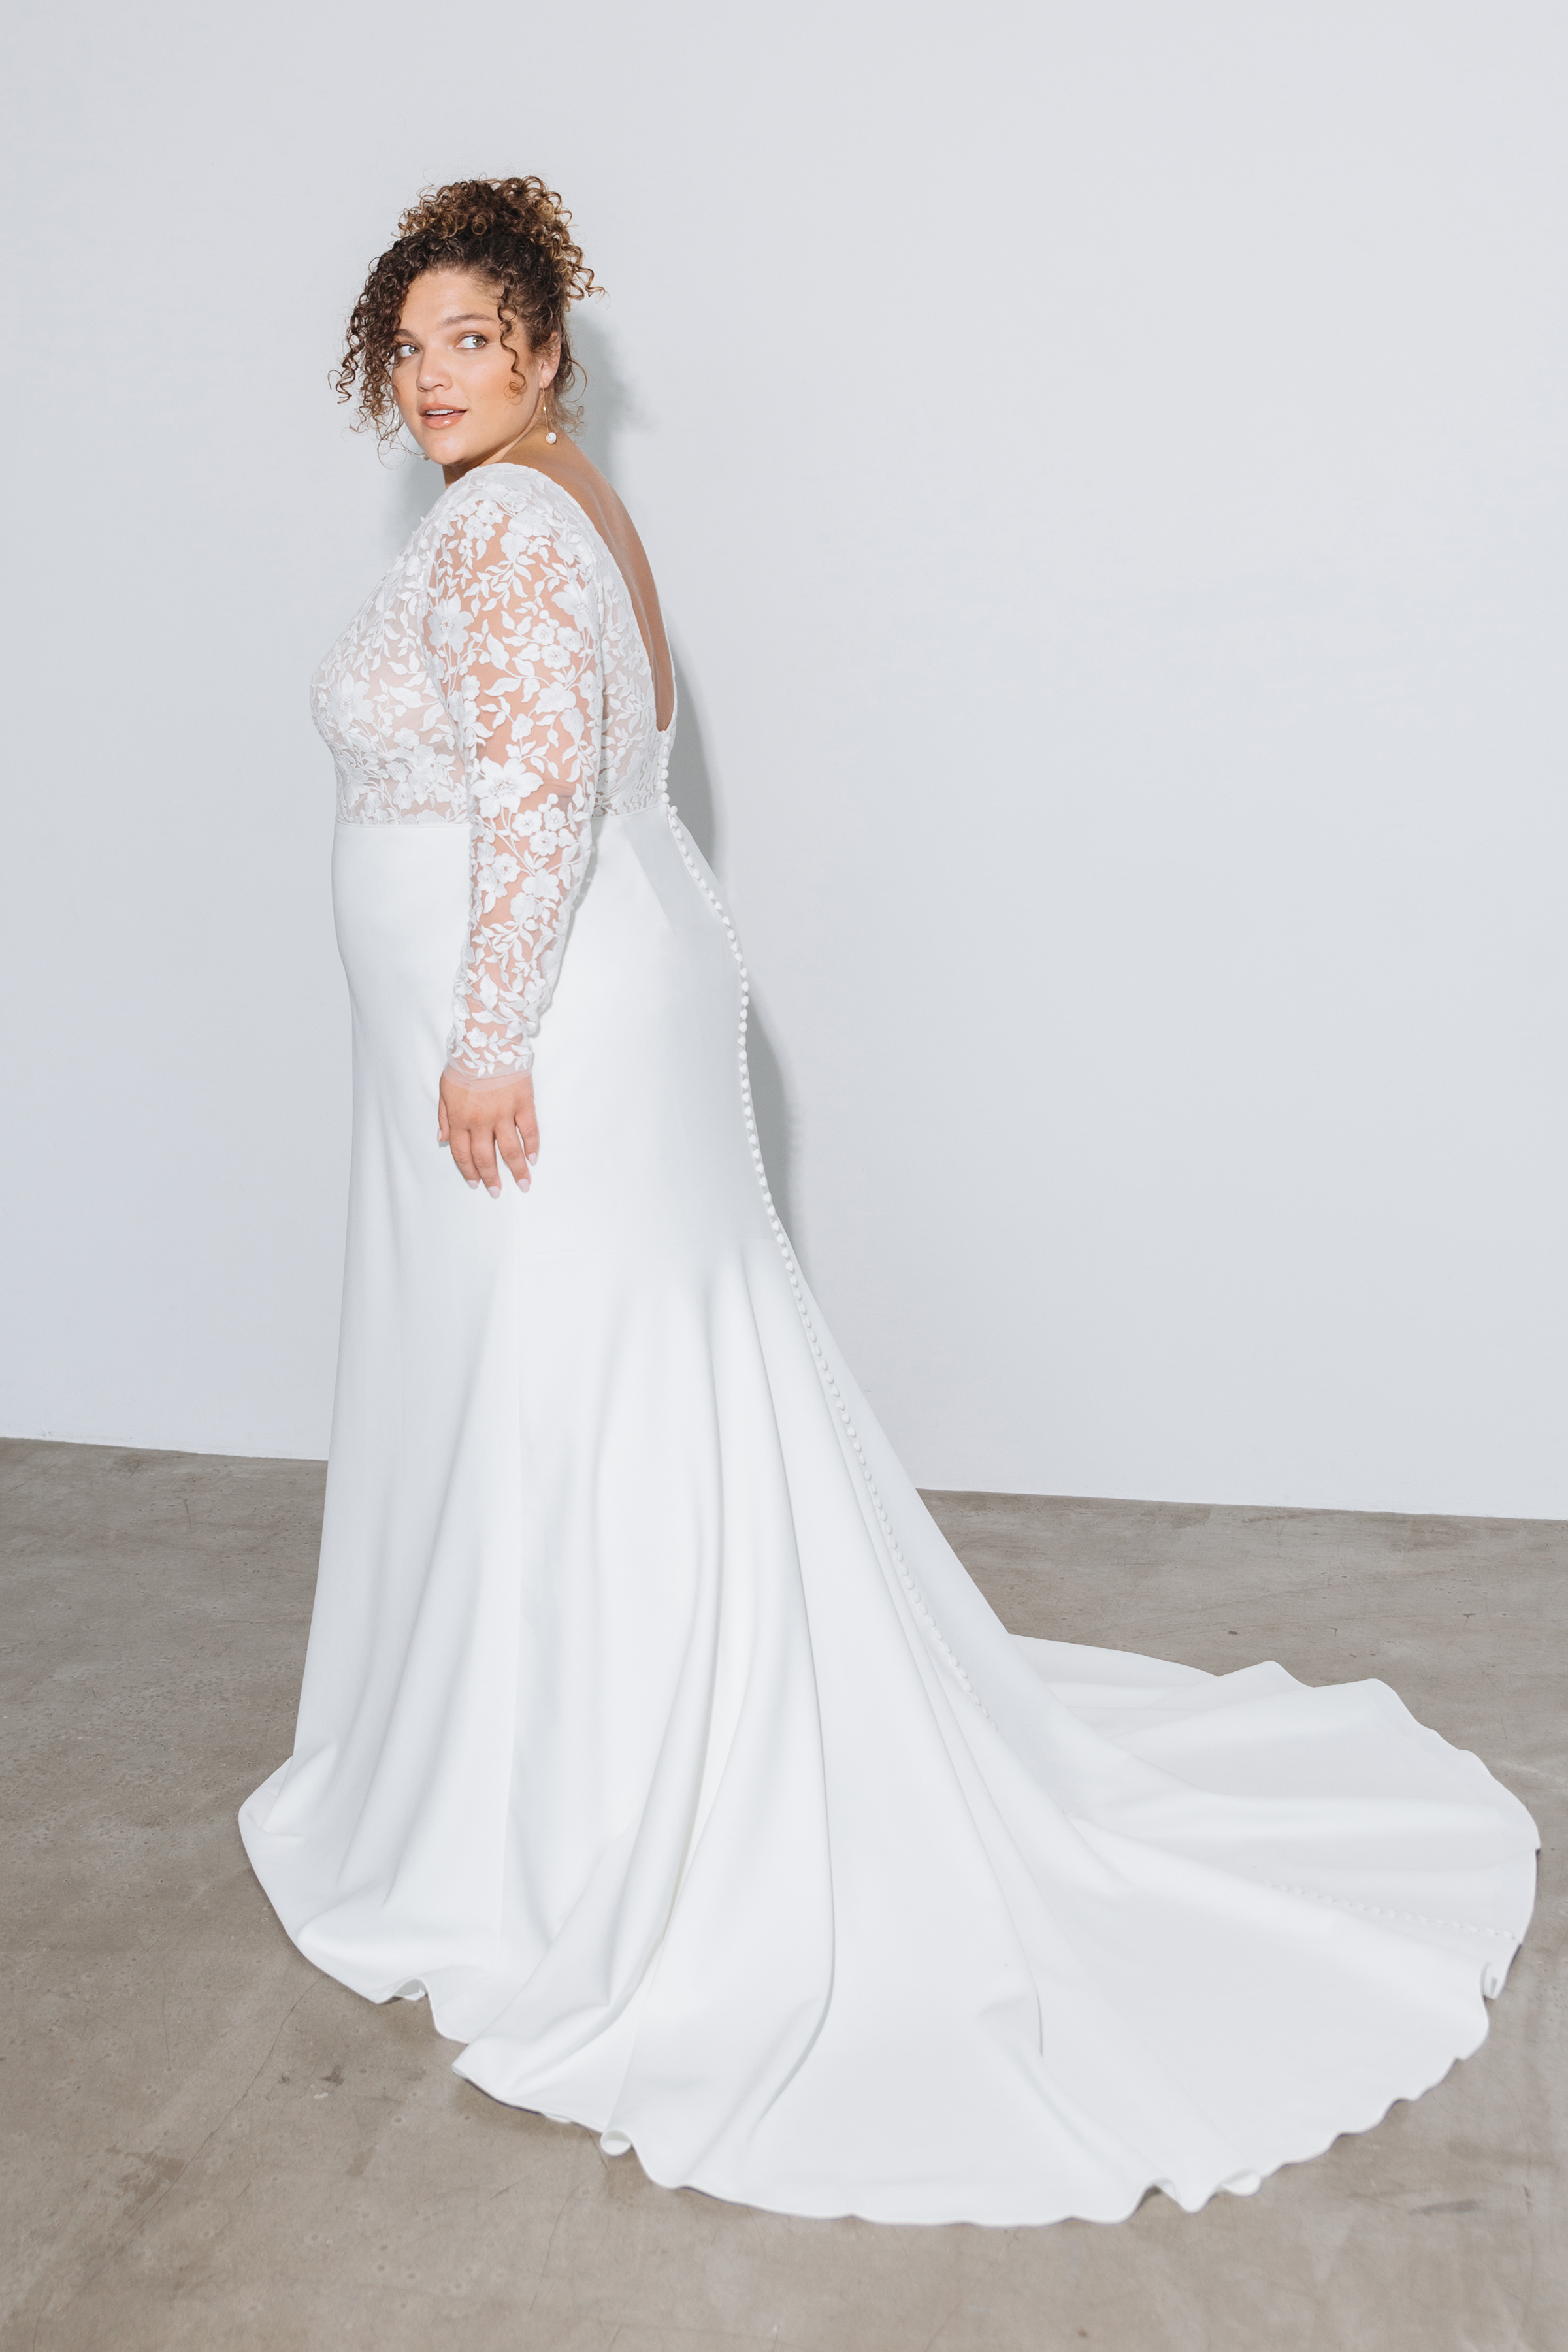 Plus Size Wedding Dress With Long Sleeves, ANY SIZE, Lace Bodice, Chiffon  Sleeves, Tulle or Chiffon Skirt, Wedding Dress for Curvy Bride -  Canada